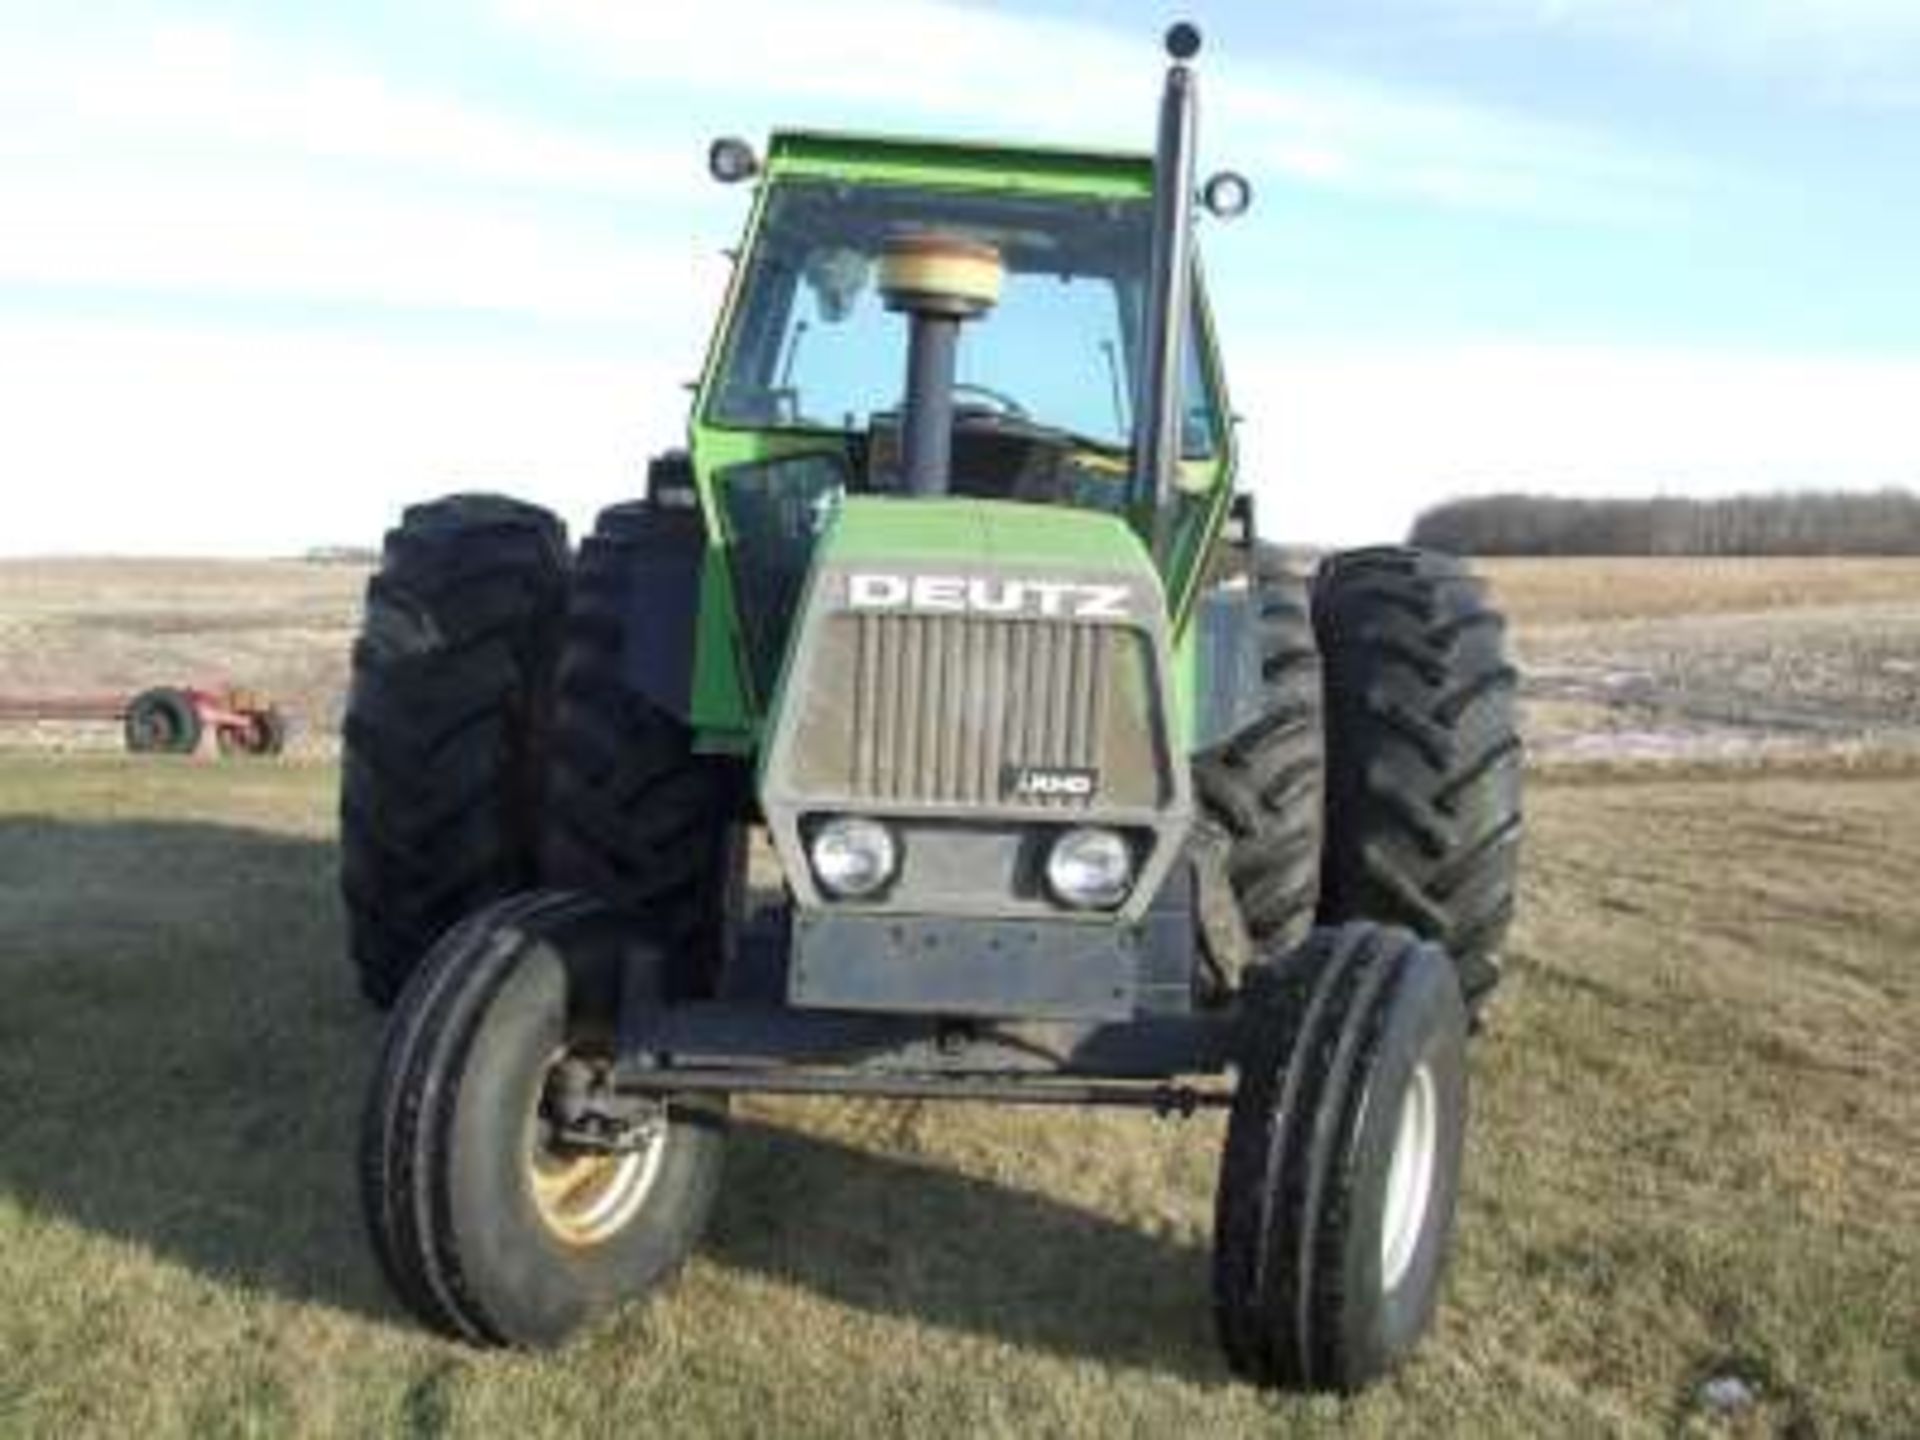 1982 Deutz DX 160 Tractor: cab, air, duel hyd, 20.8x38 duals, 6290 hours, nice - Image 3 of 3